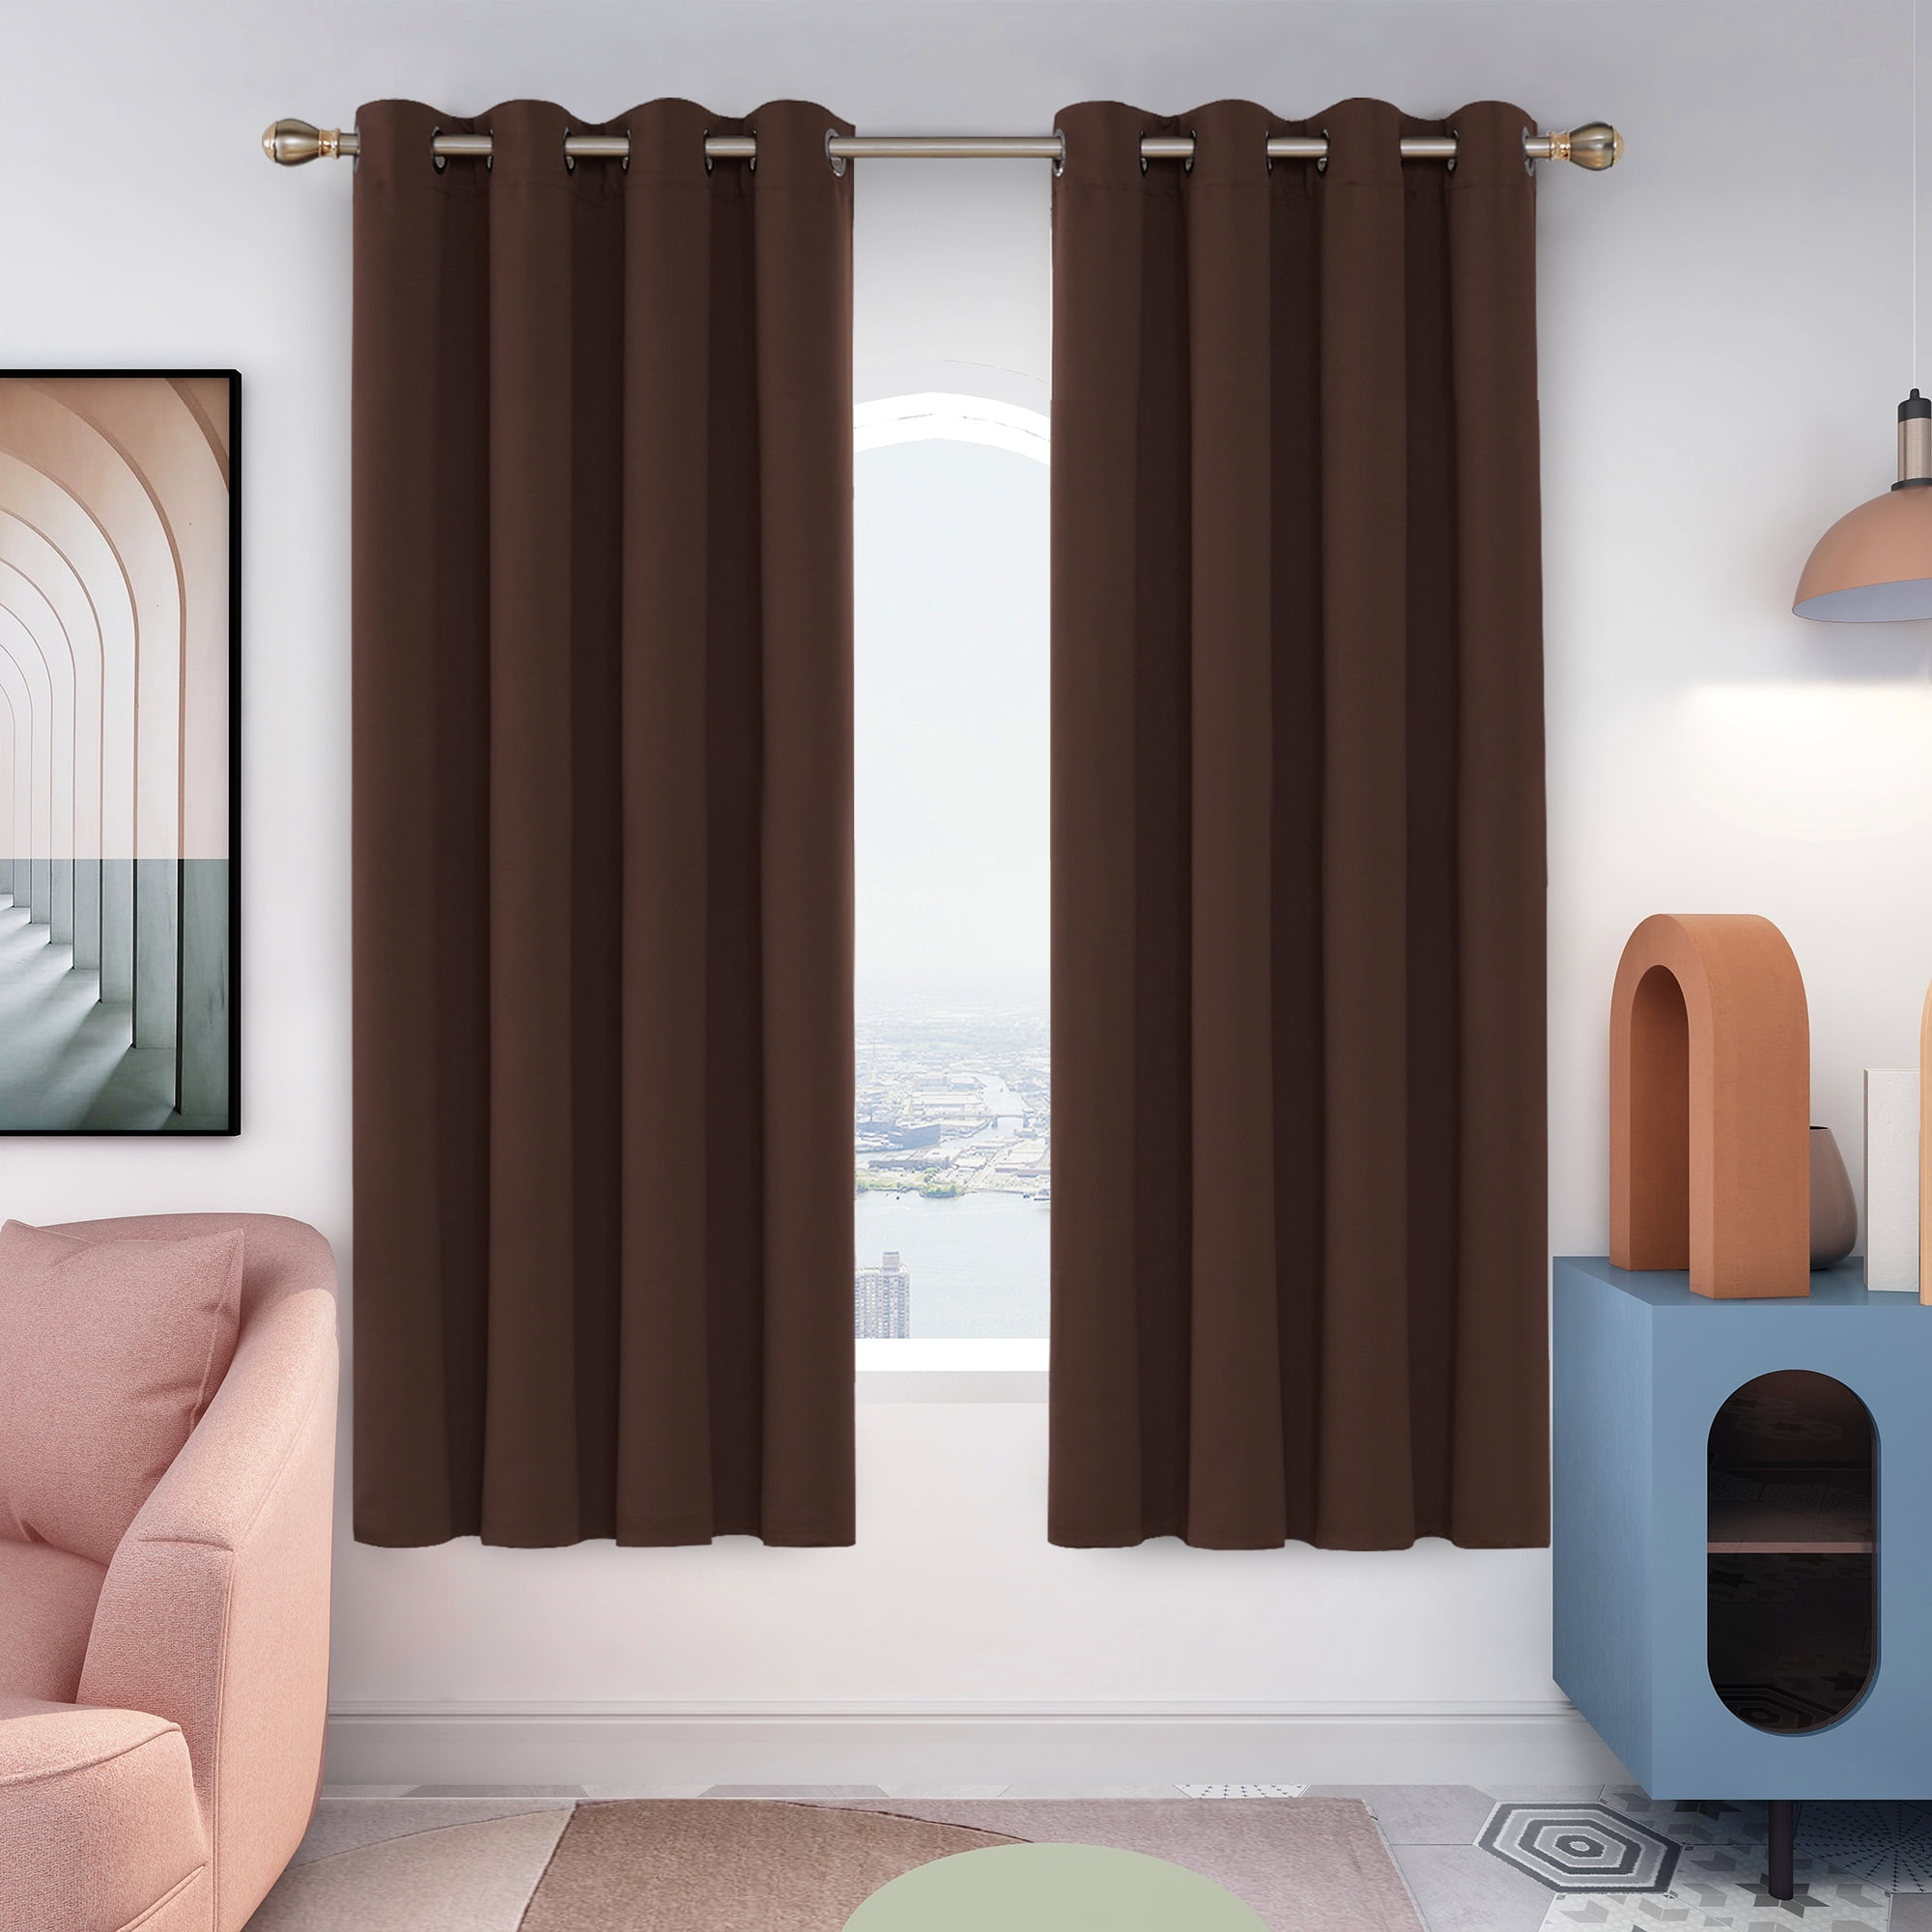 Deconovo Thermal Insulated Blackout Curtains 52x72 inch - Grommet Room Darkening Window Curtains for Bedroom (52x72 inch, Chocolate, Set of 2 Panels)